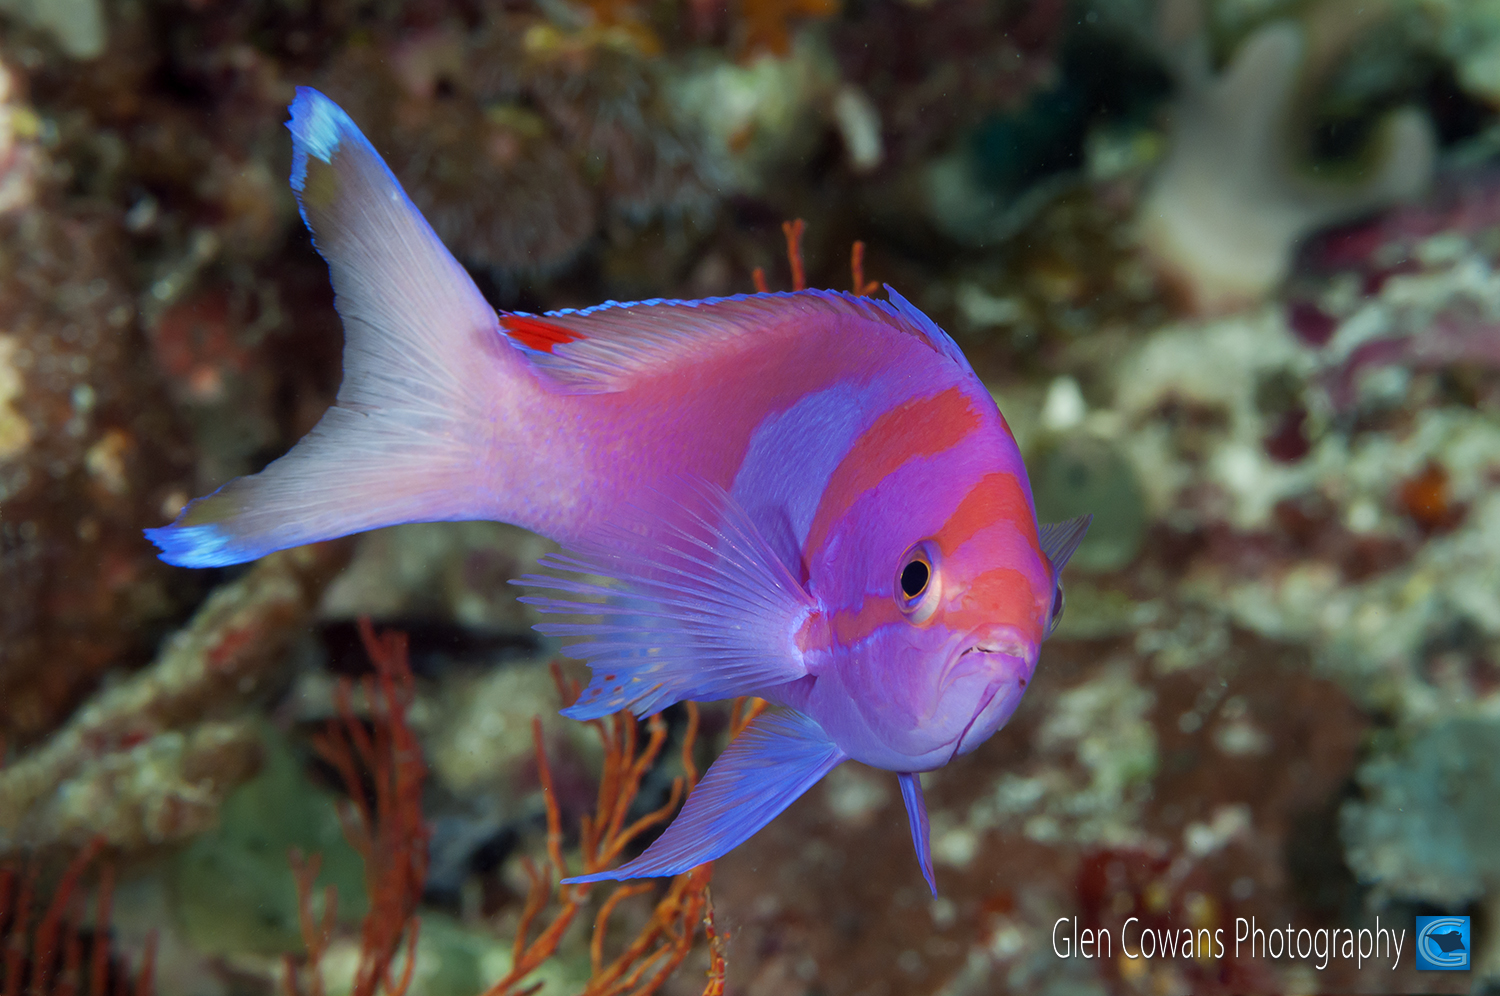 The beautiful square-spot anthia, much sought-after for that portrait shot